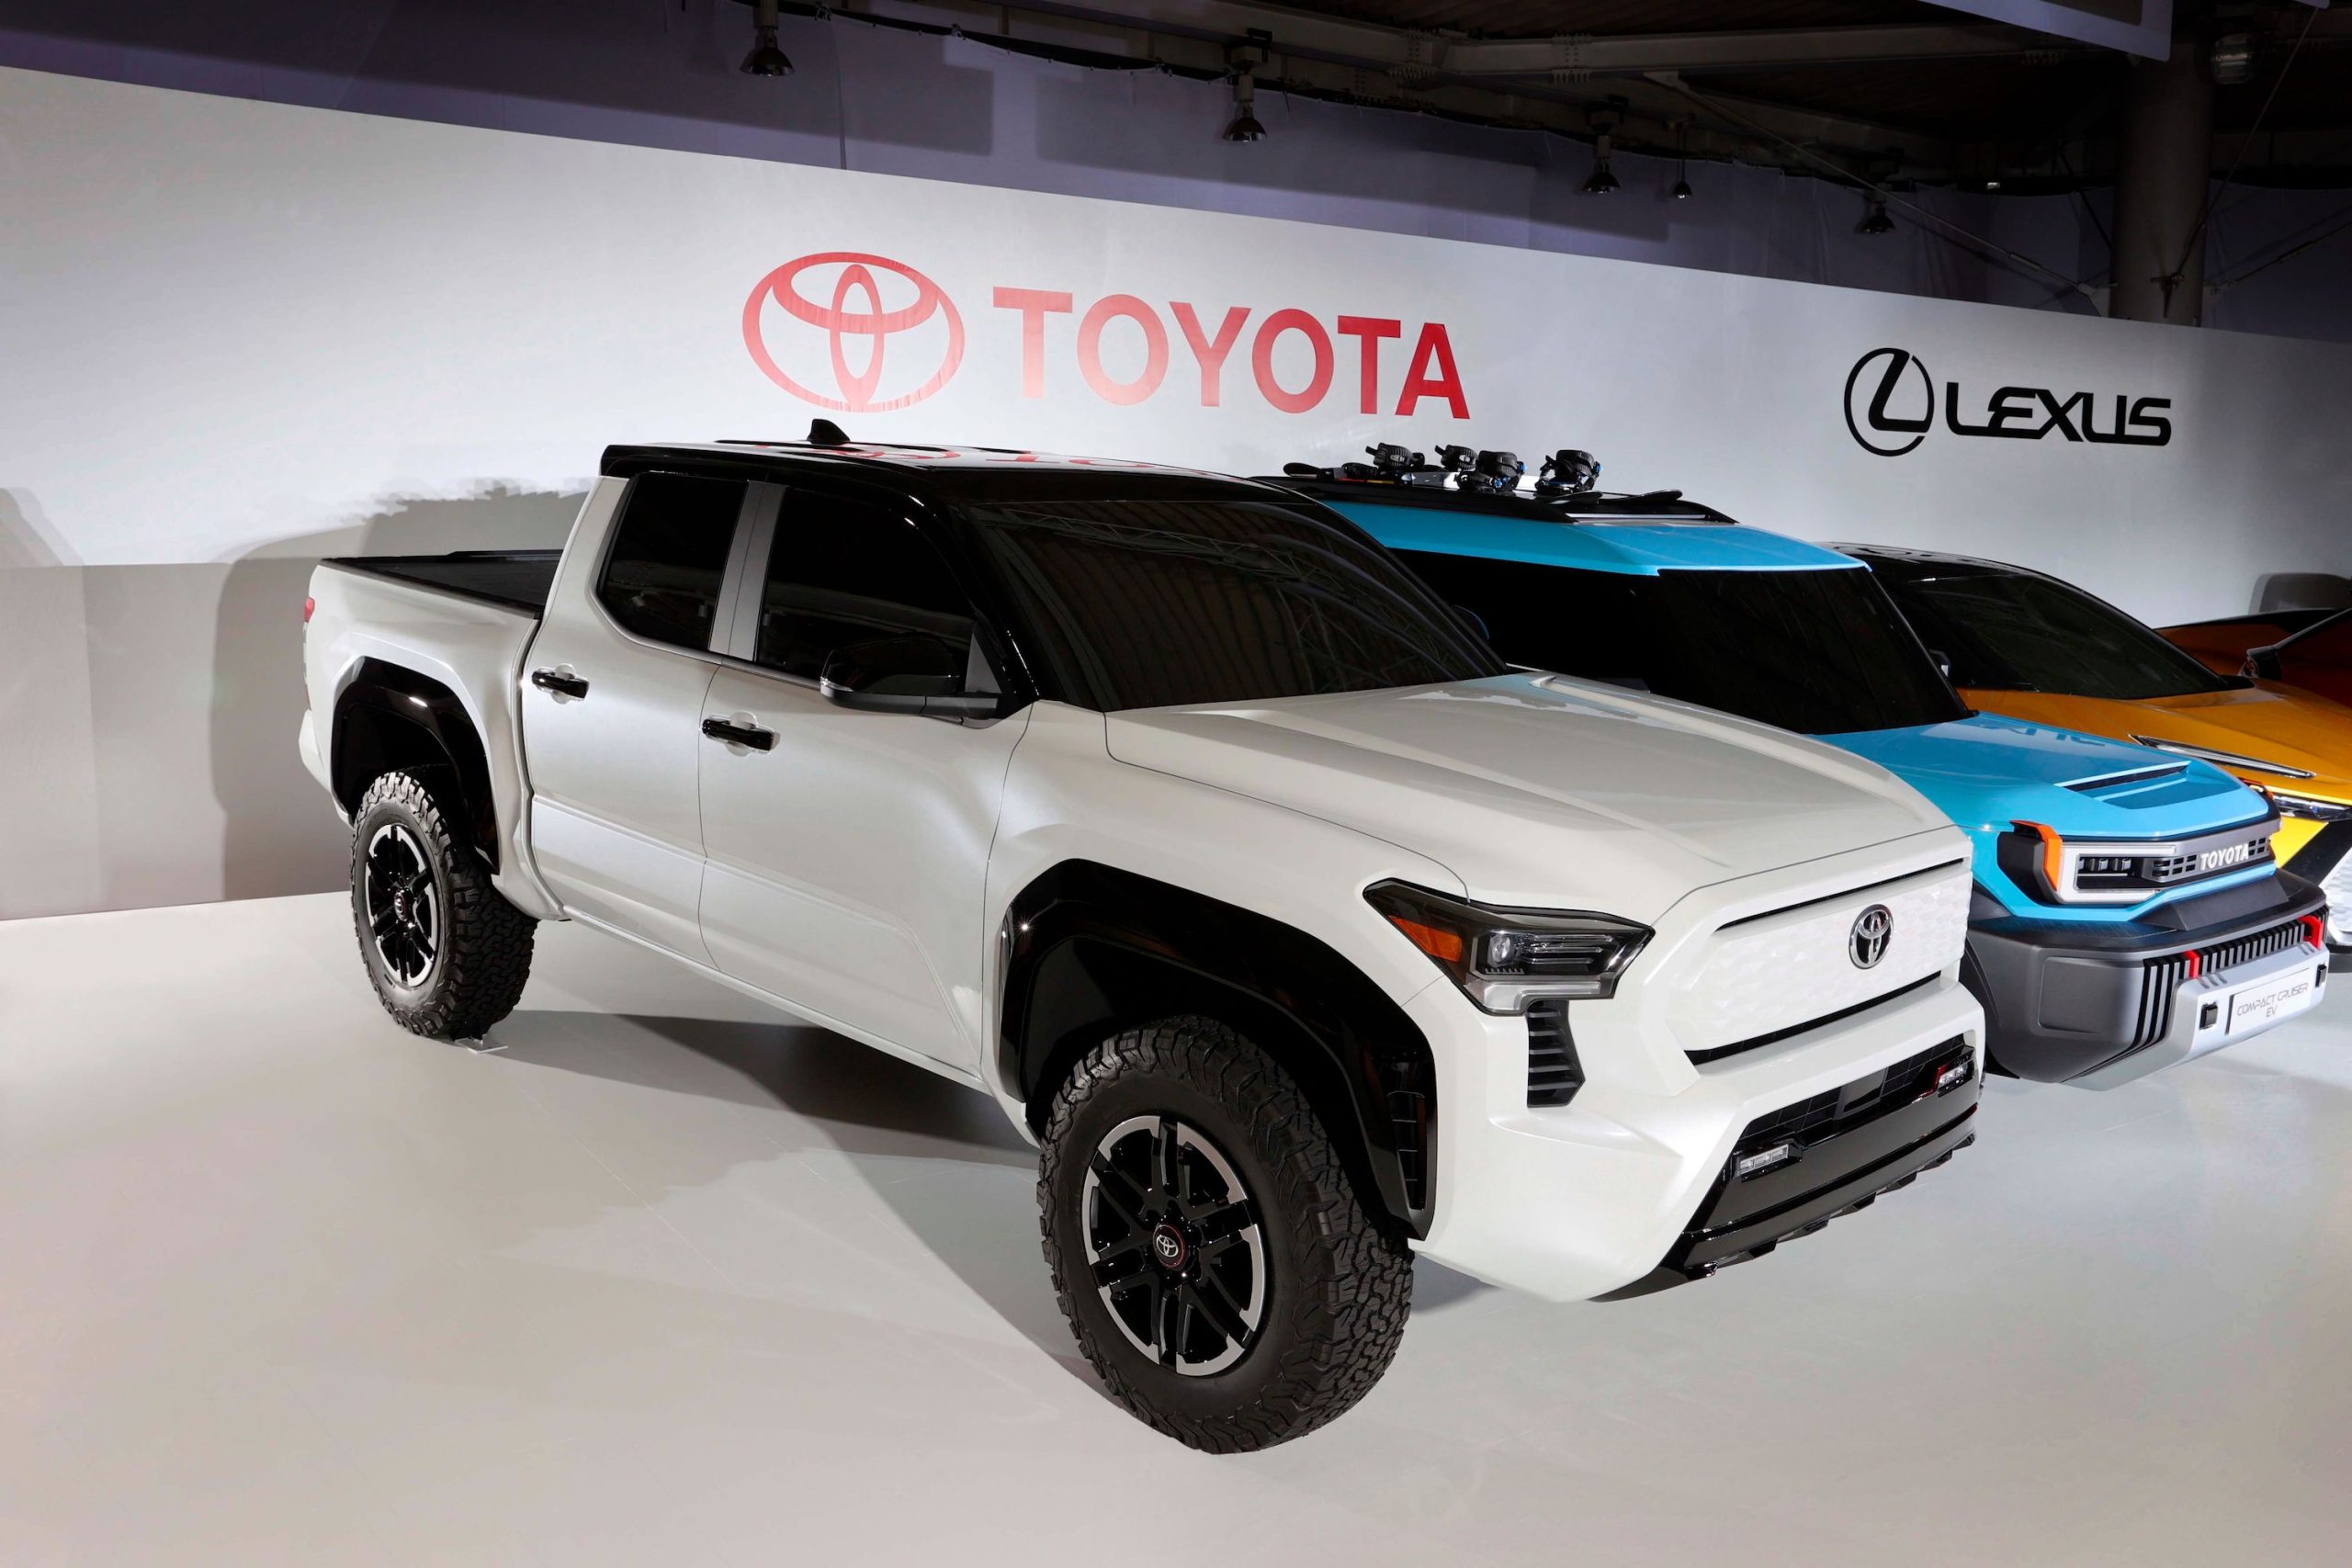 Electric Hilux Pickup Truck Confirmed by Toyota, Coming in 2025